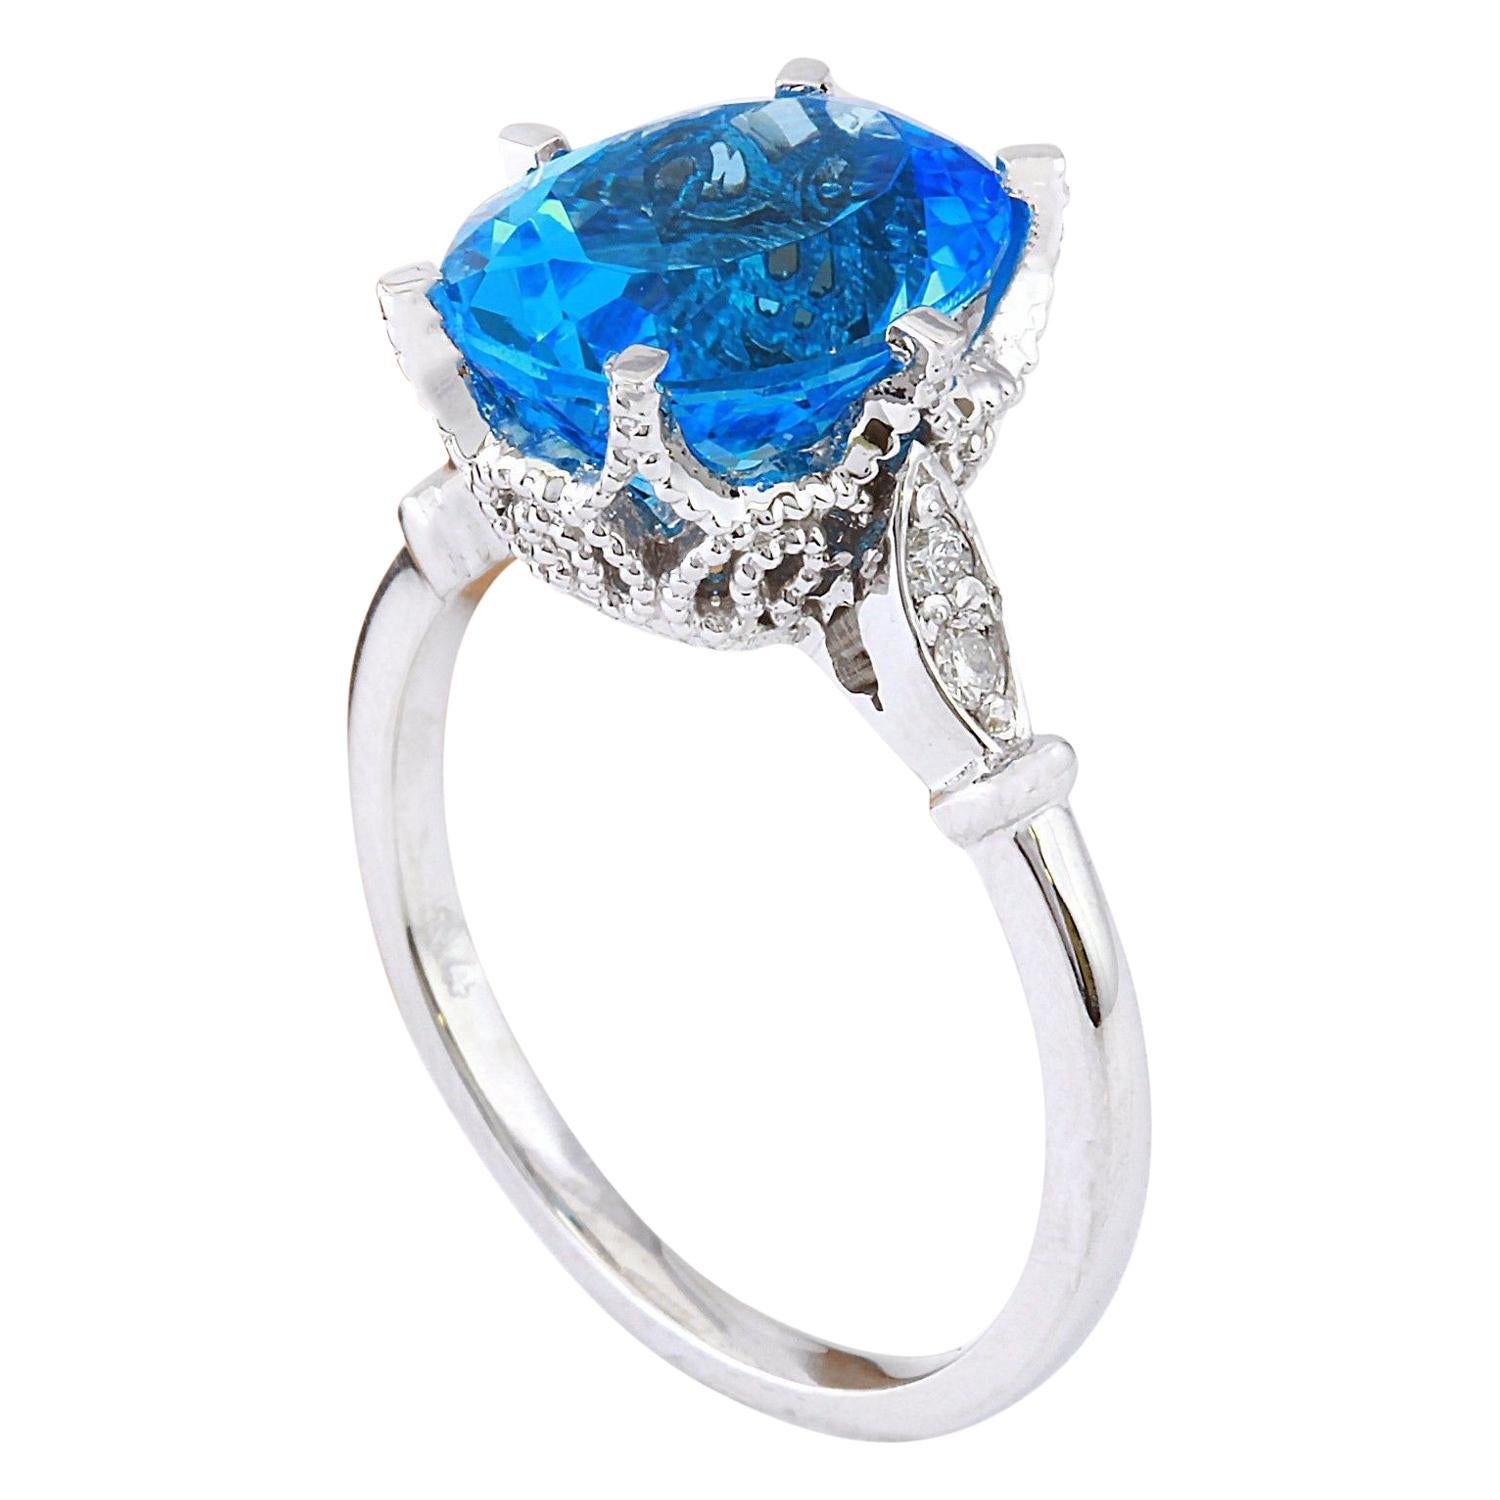 Oval Cut Vibrant Natural Topaz Diamond Ring 14 Karat Solid White Gold  For Sale